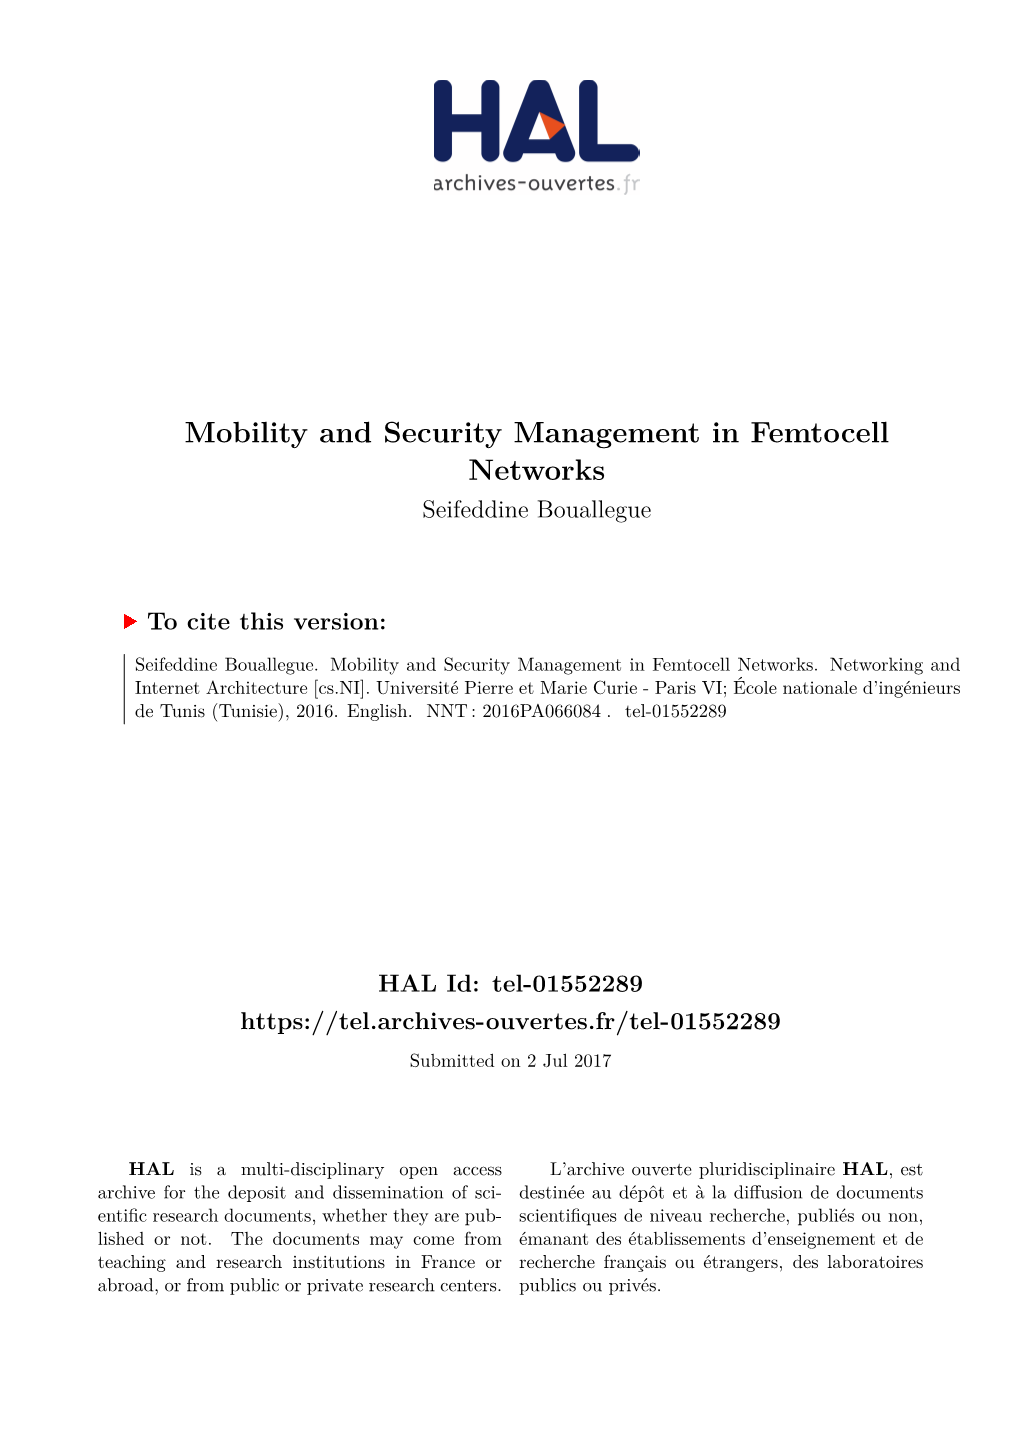 Mobility and Security Management in Femtocell Networks Seifeddine Bouallegue